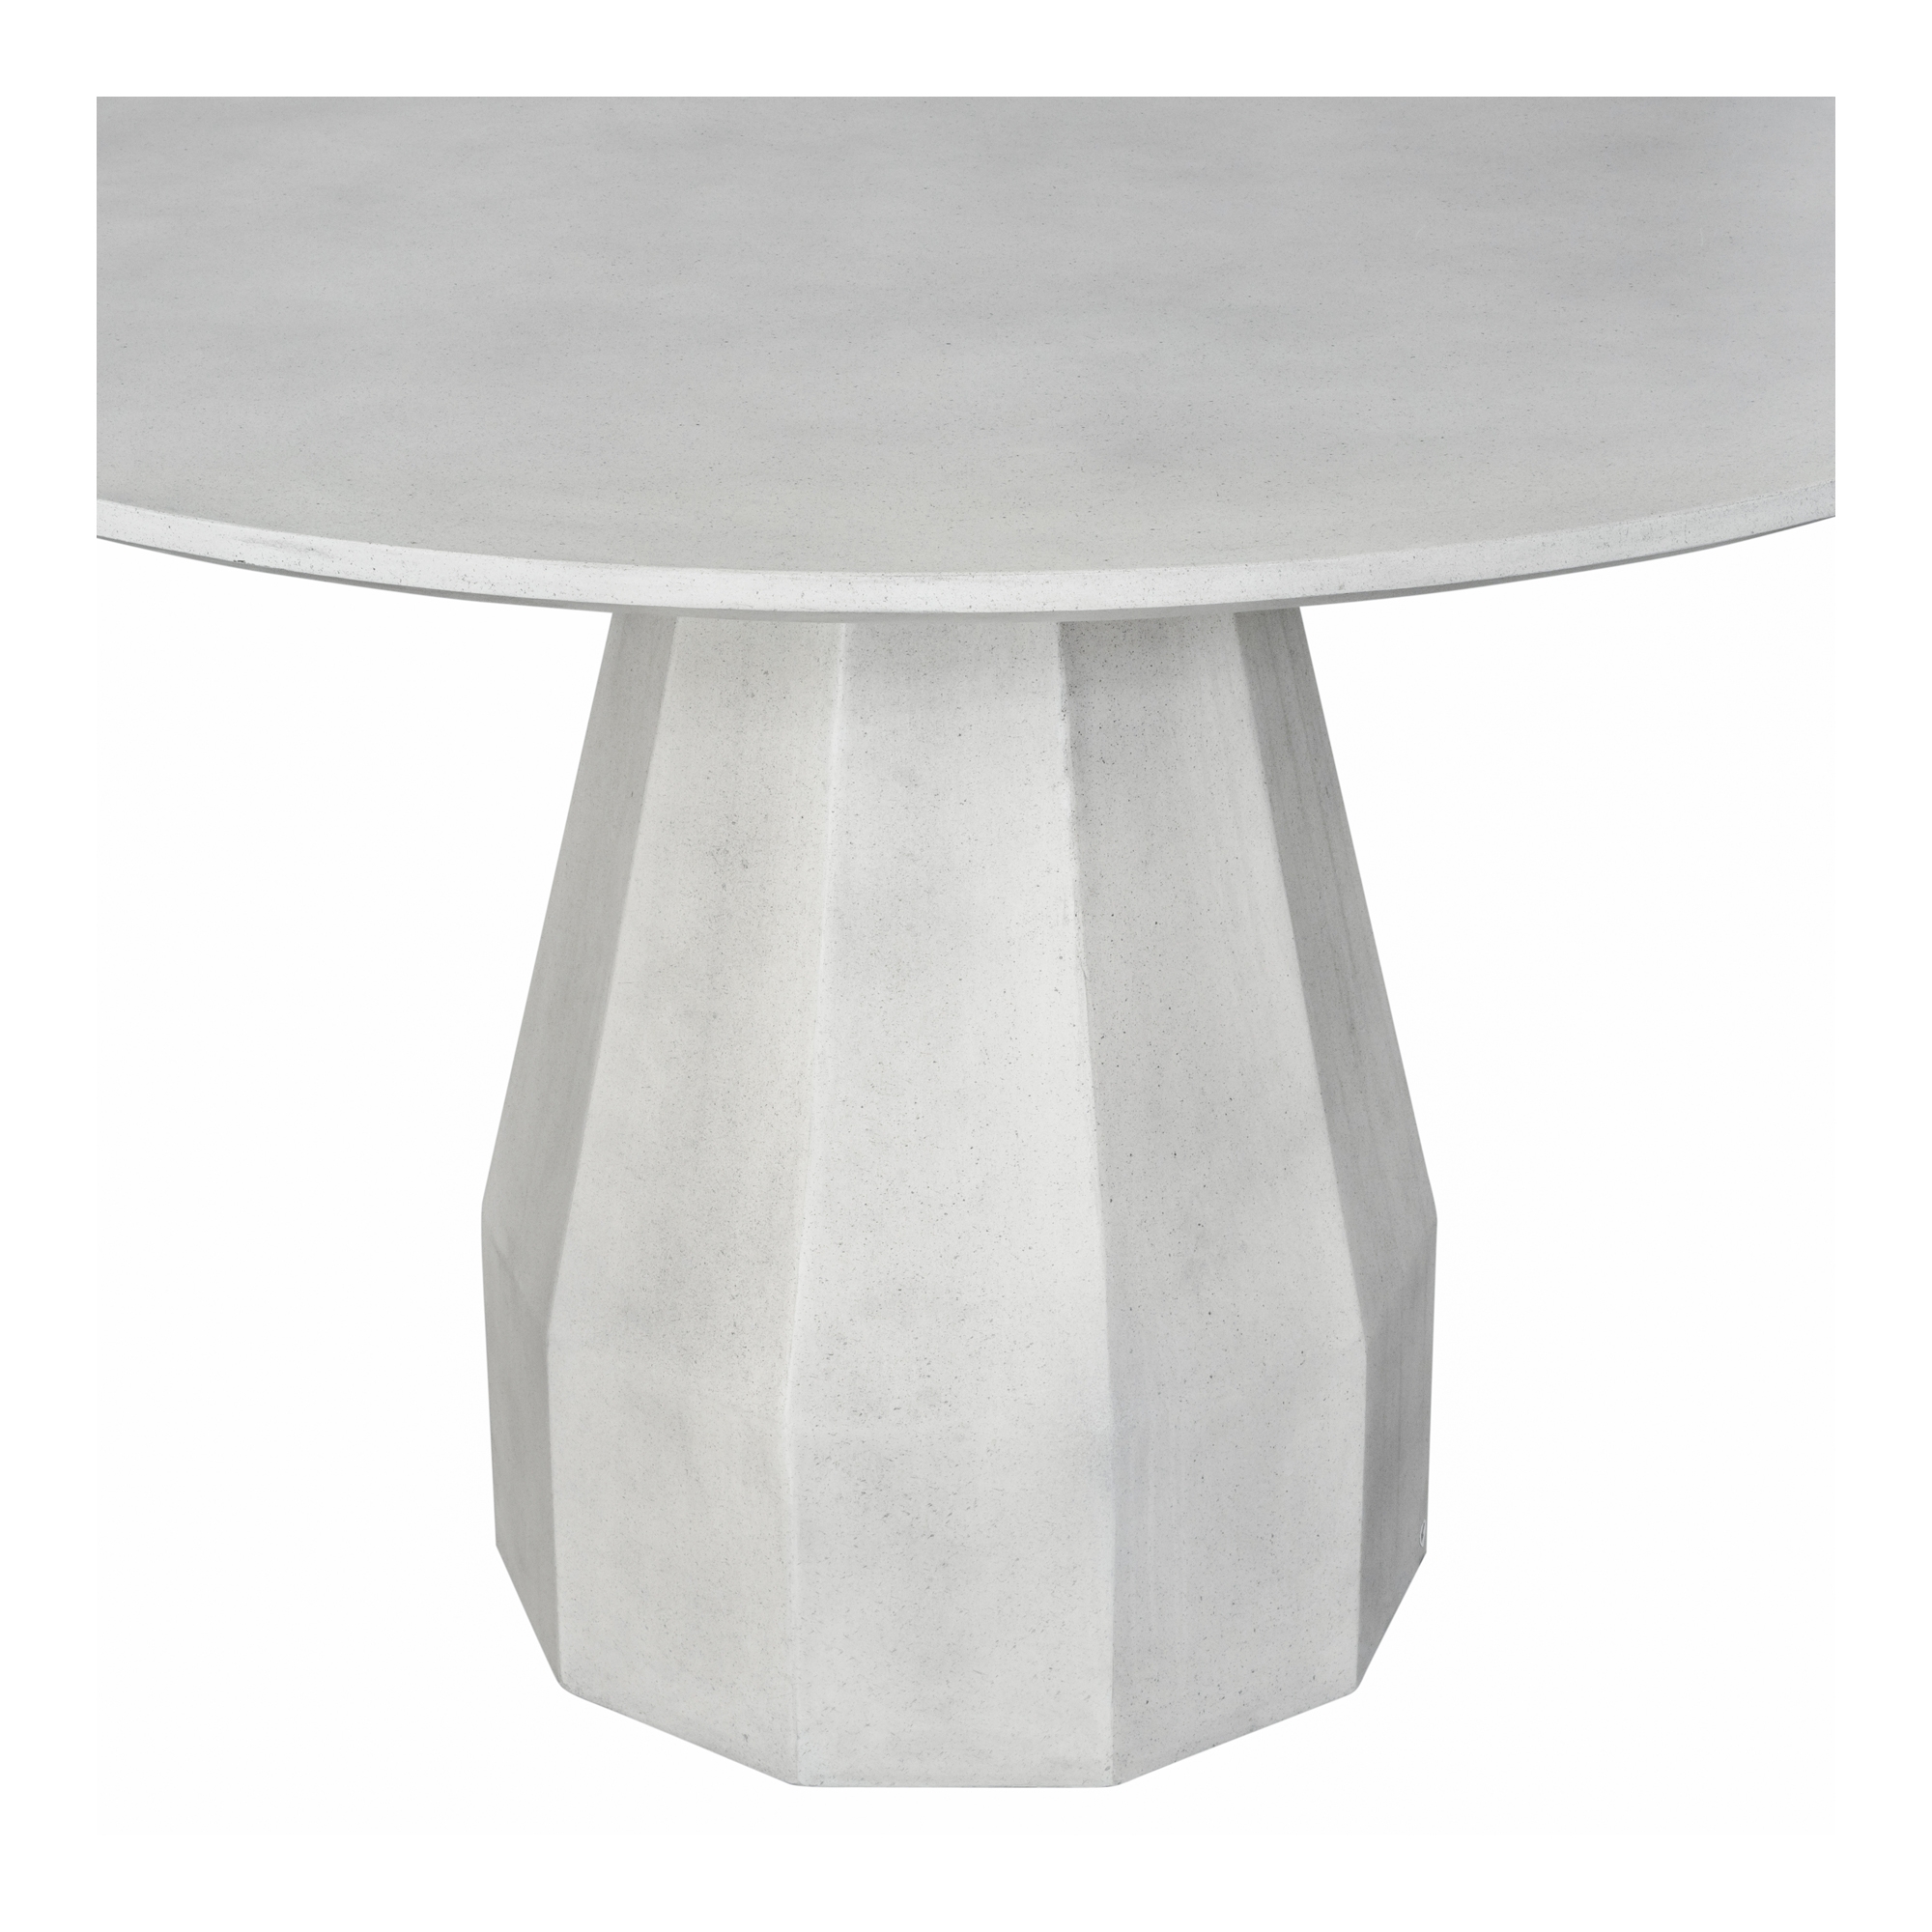 Templo Outdoor Dining Table Antique White - Image 1